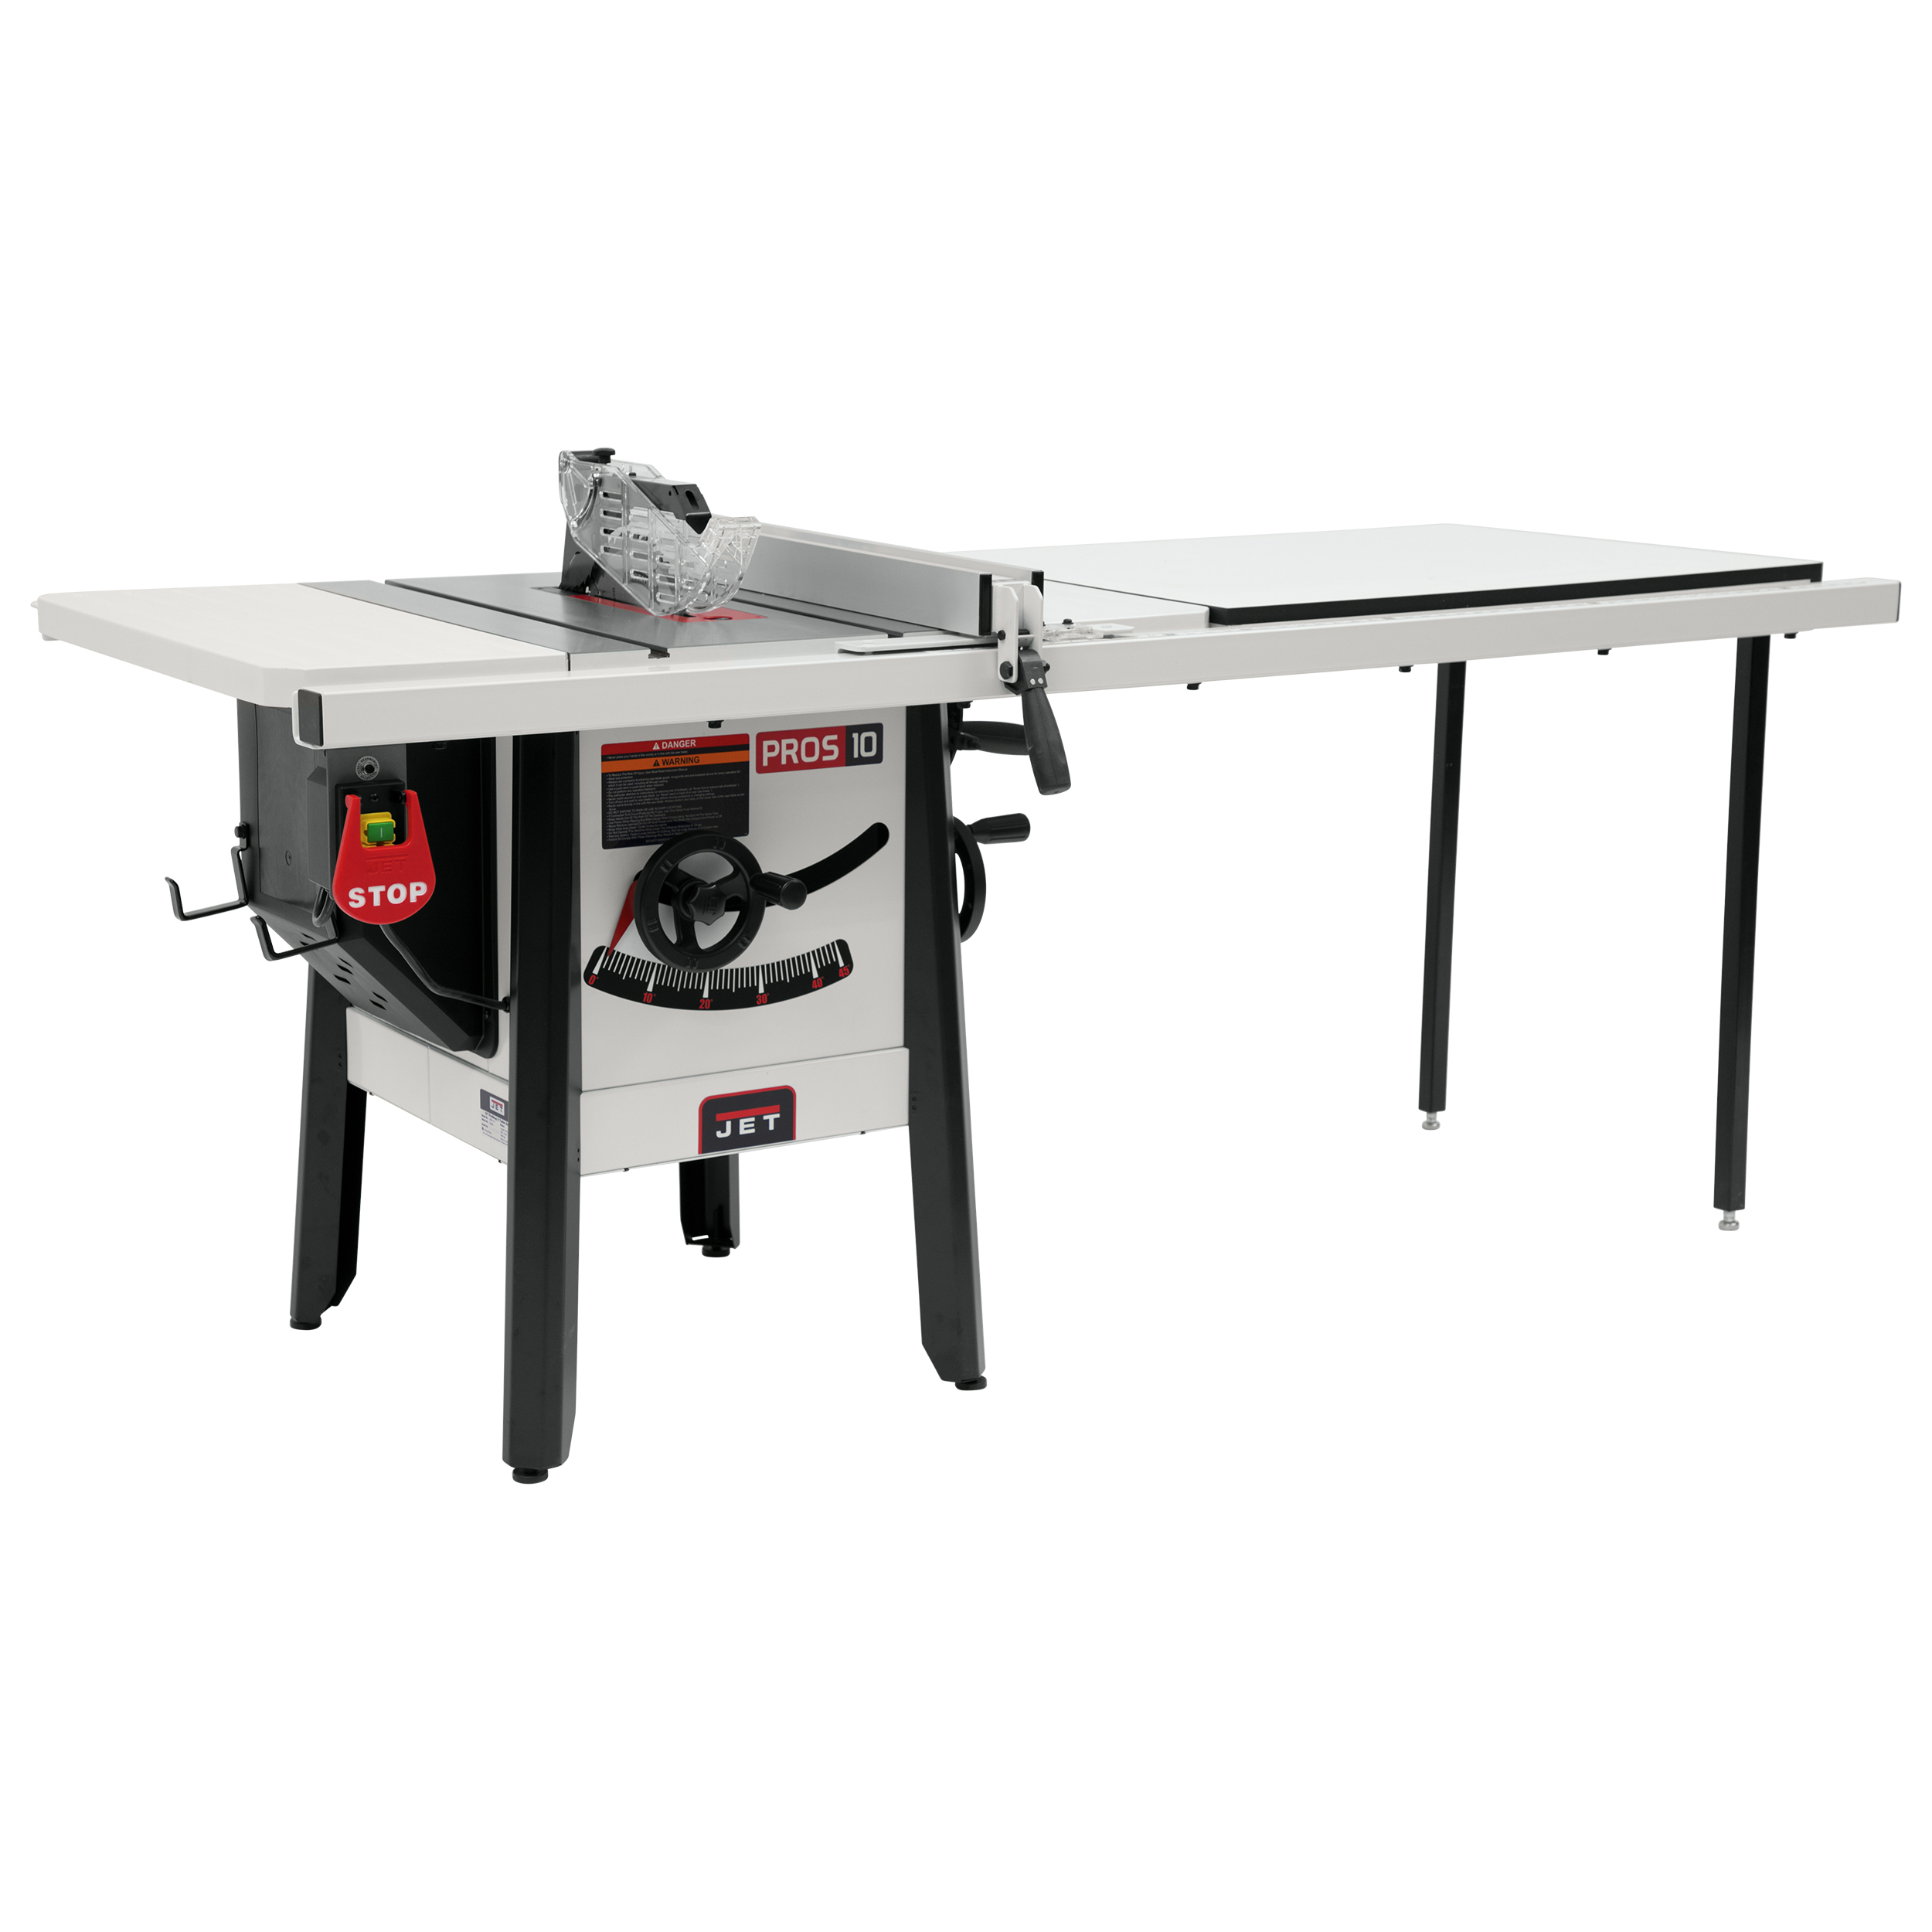 Proshop Ii Table Saw With Stamped Steel Wings, 115v, 52" Rip